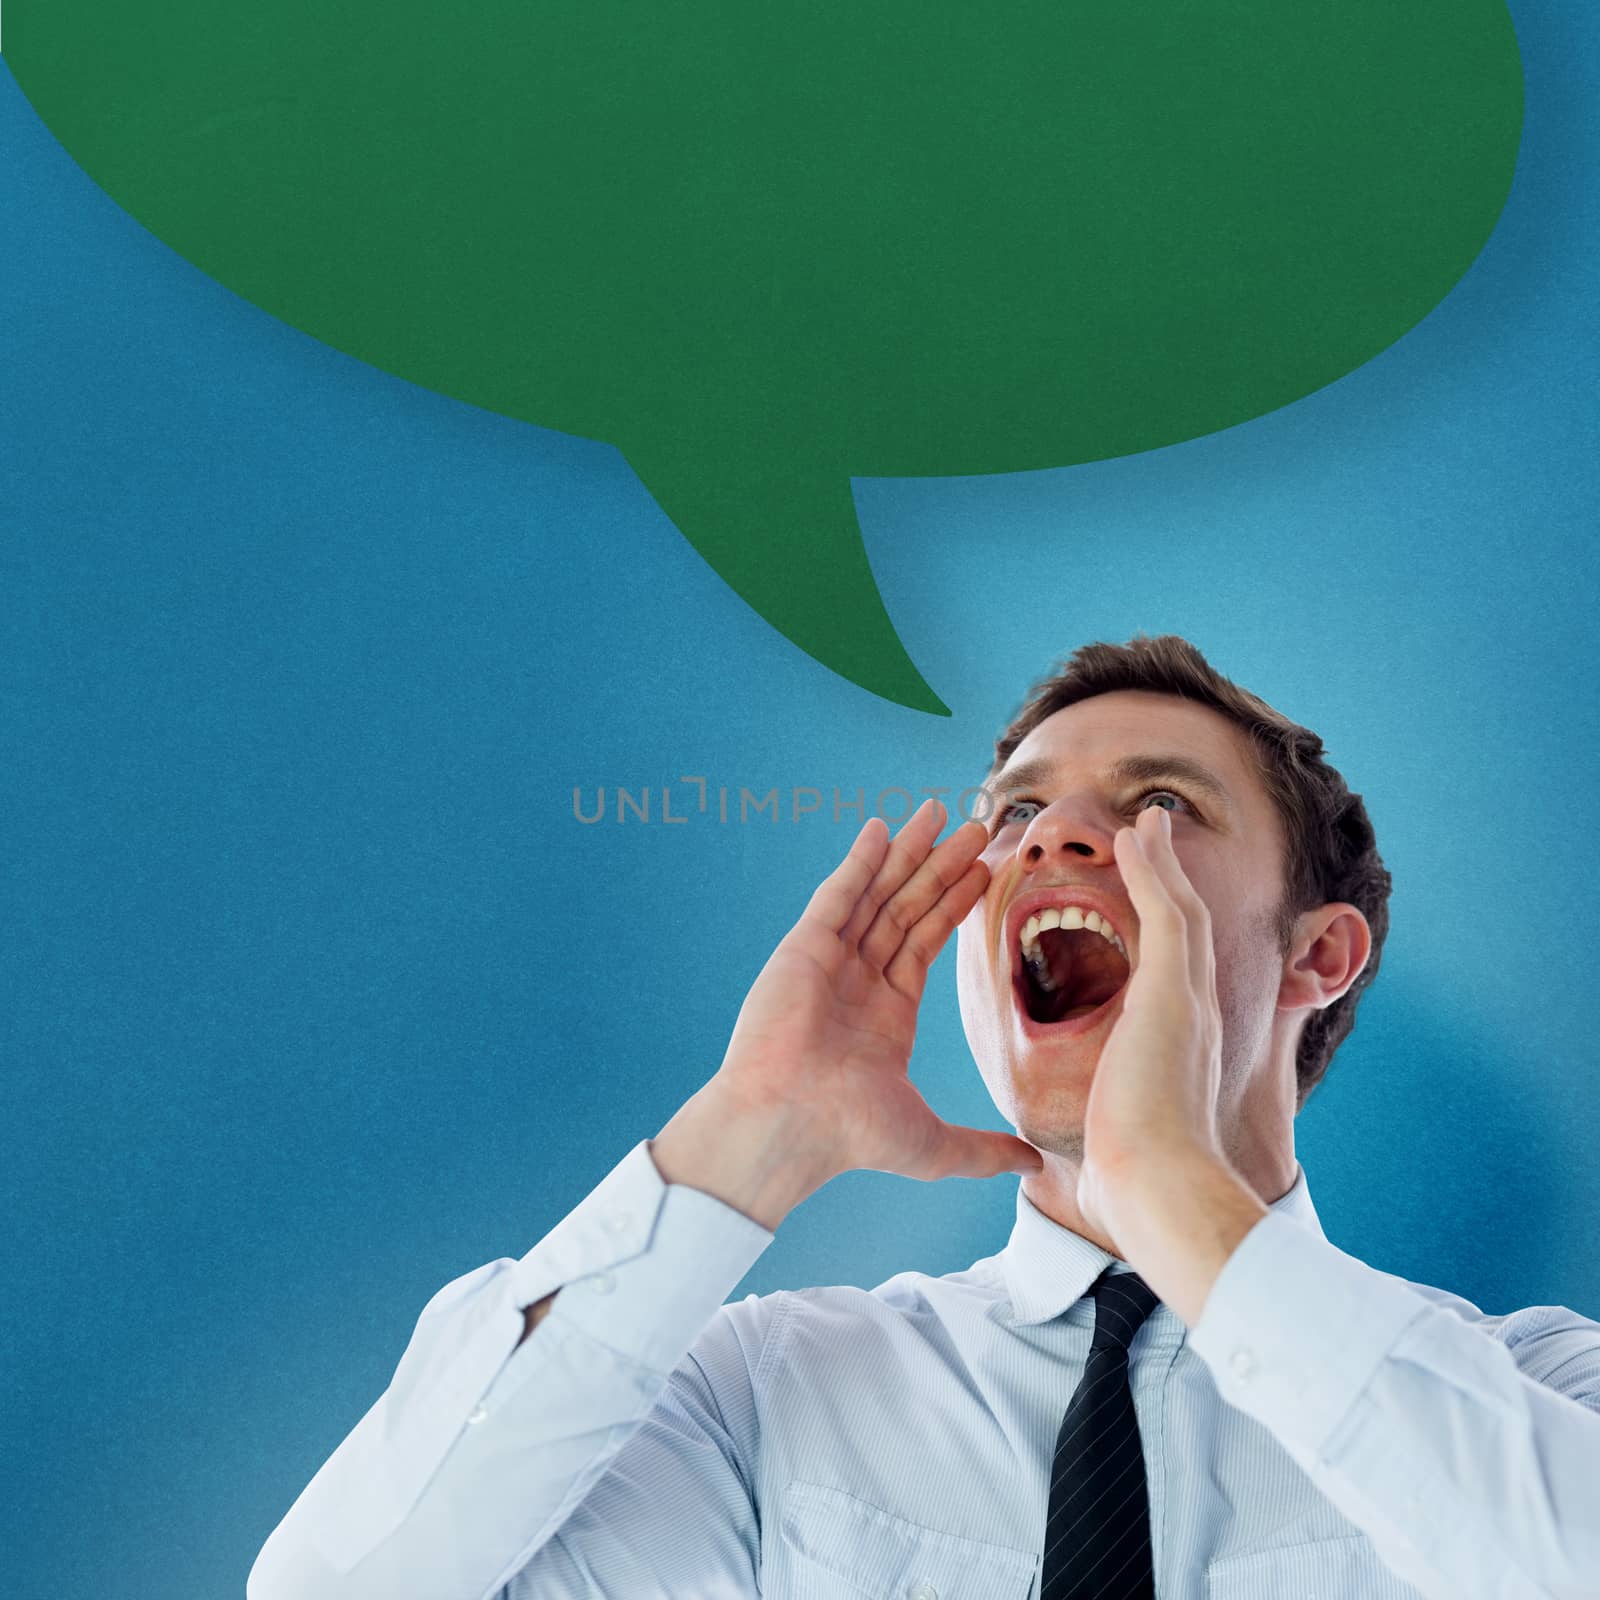 Businessman shouting with speech bubble against blue background with vignette